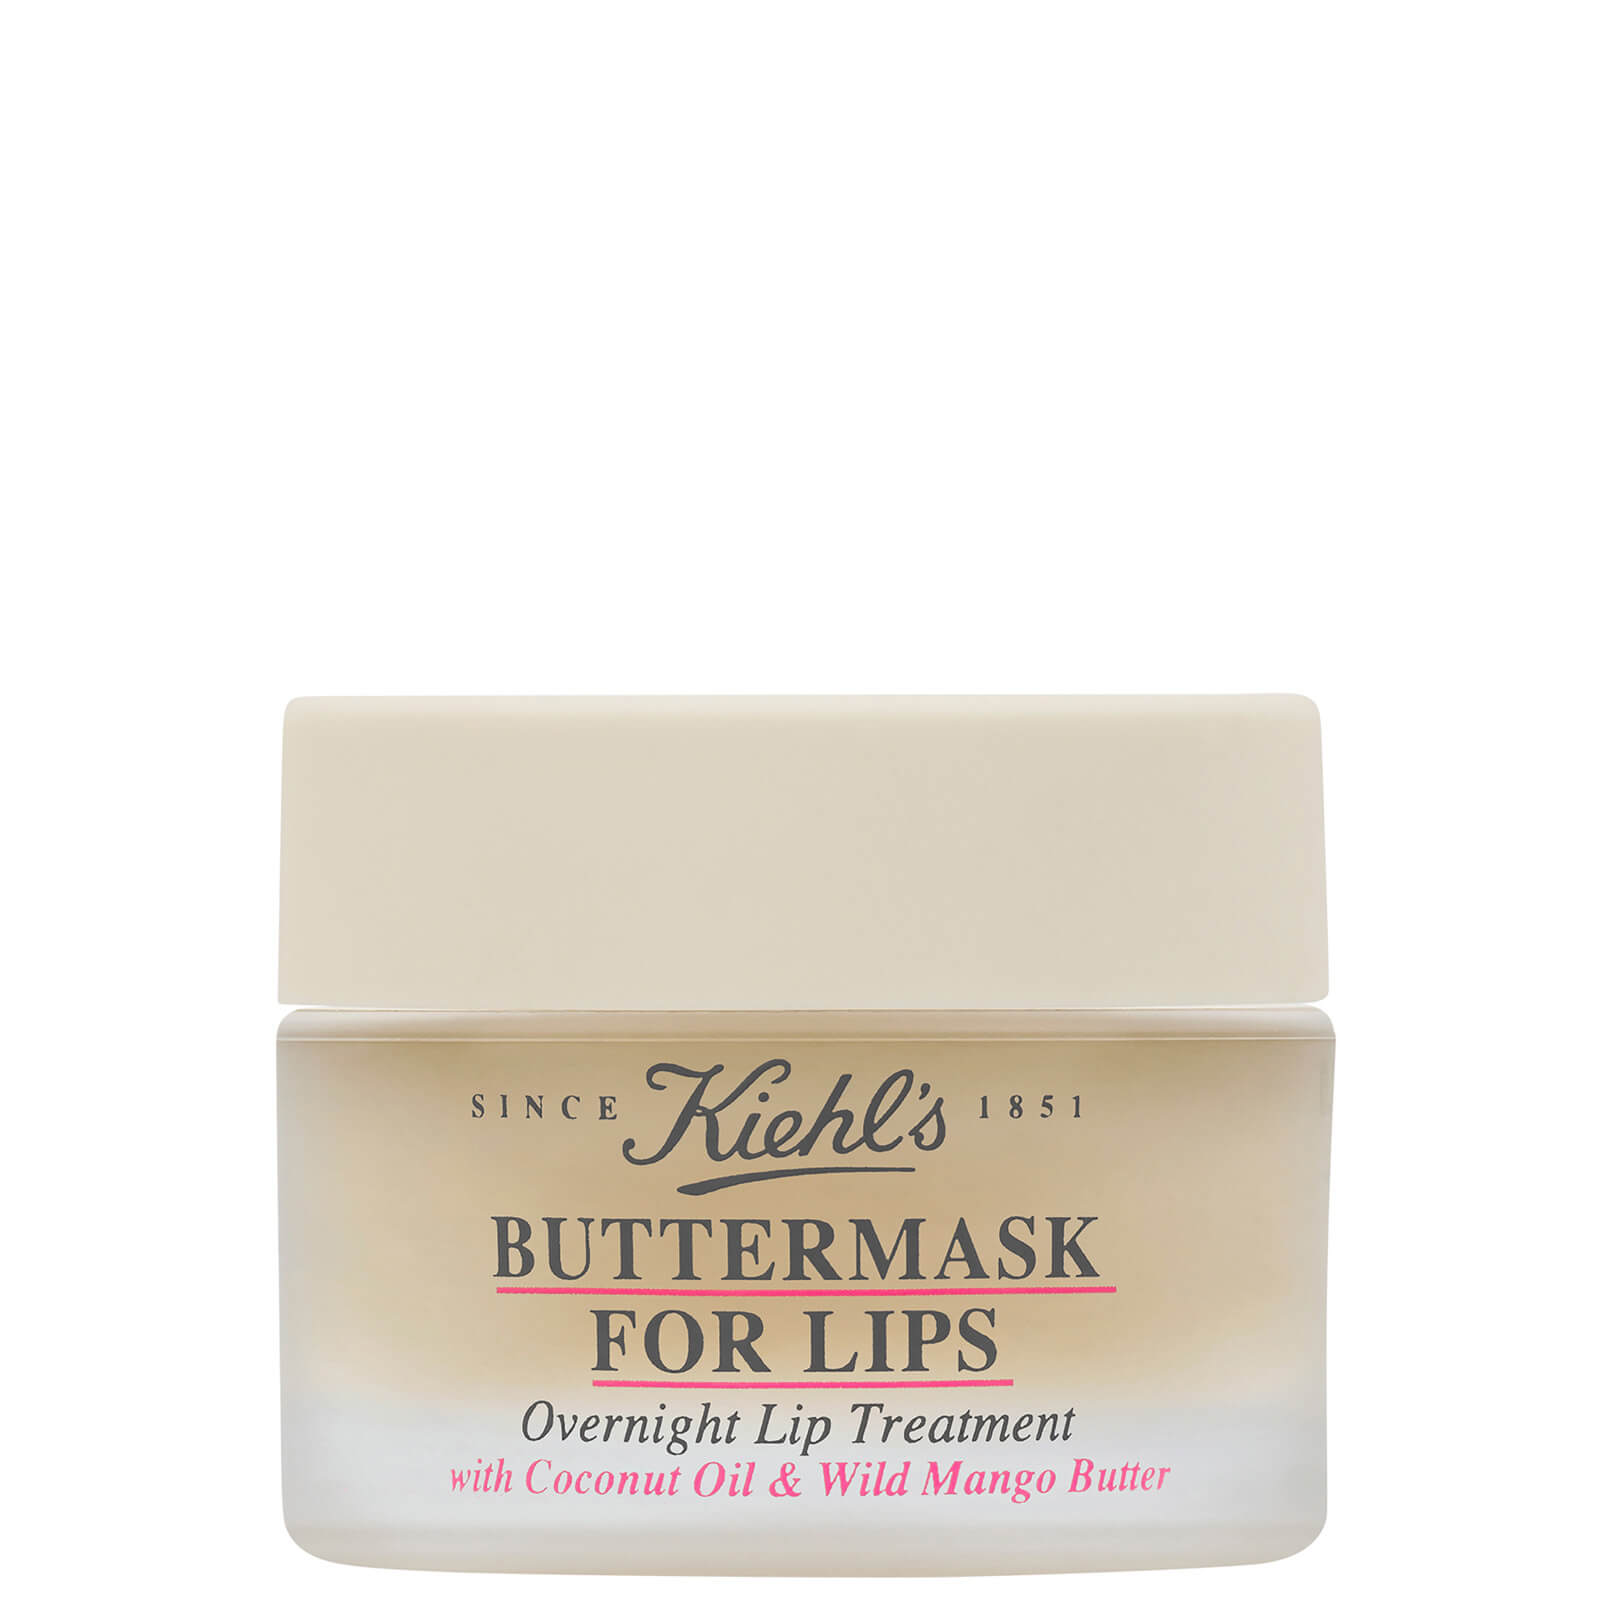 Photos - Facial Mask Kiehl's Buttermask for Lips 10g S3325800